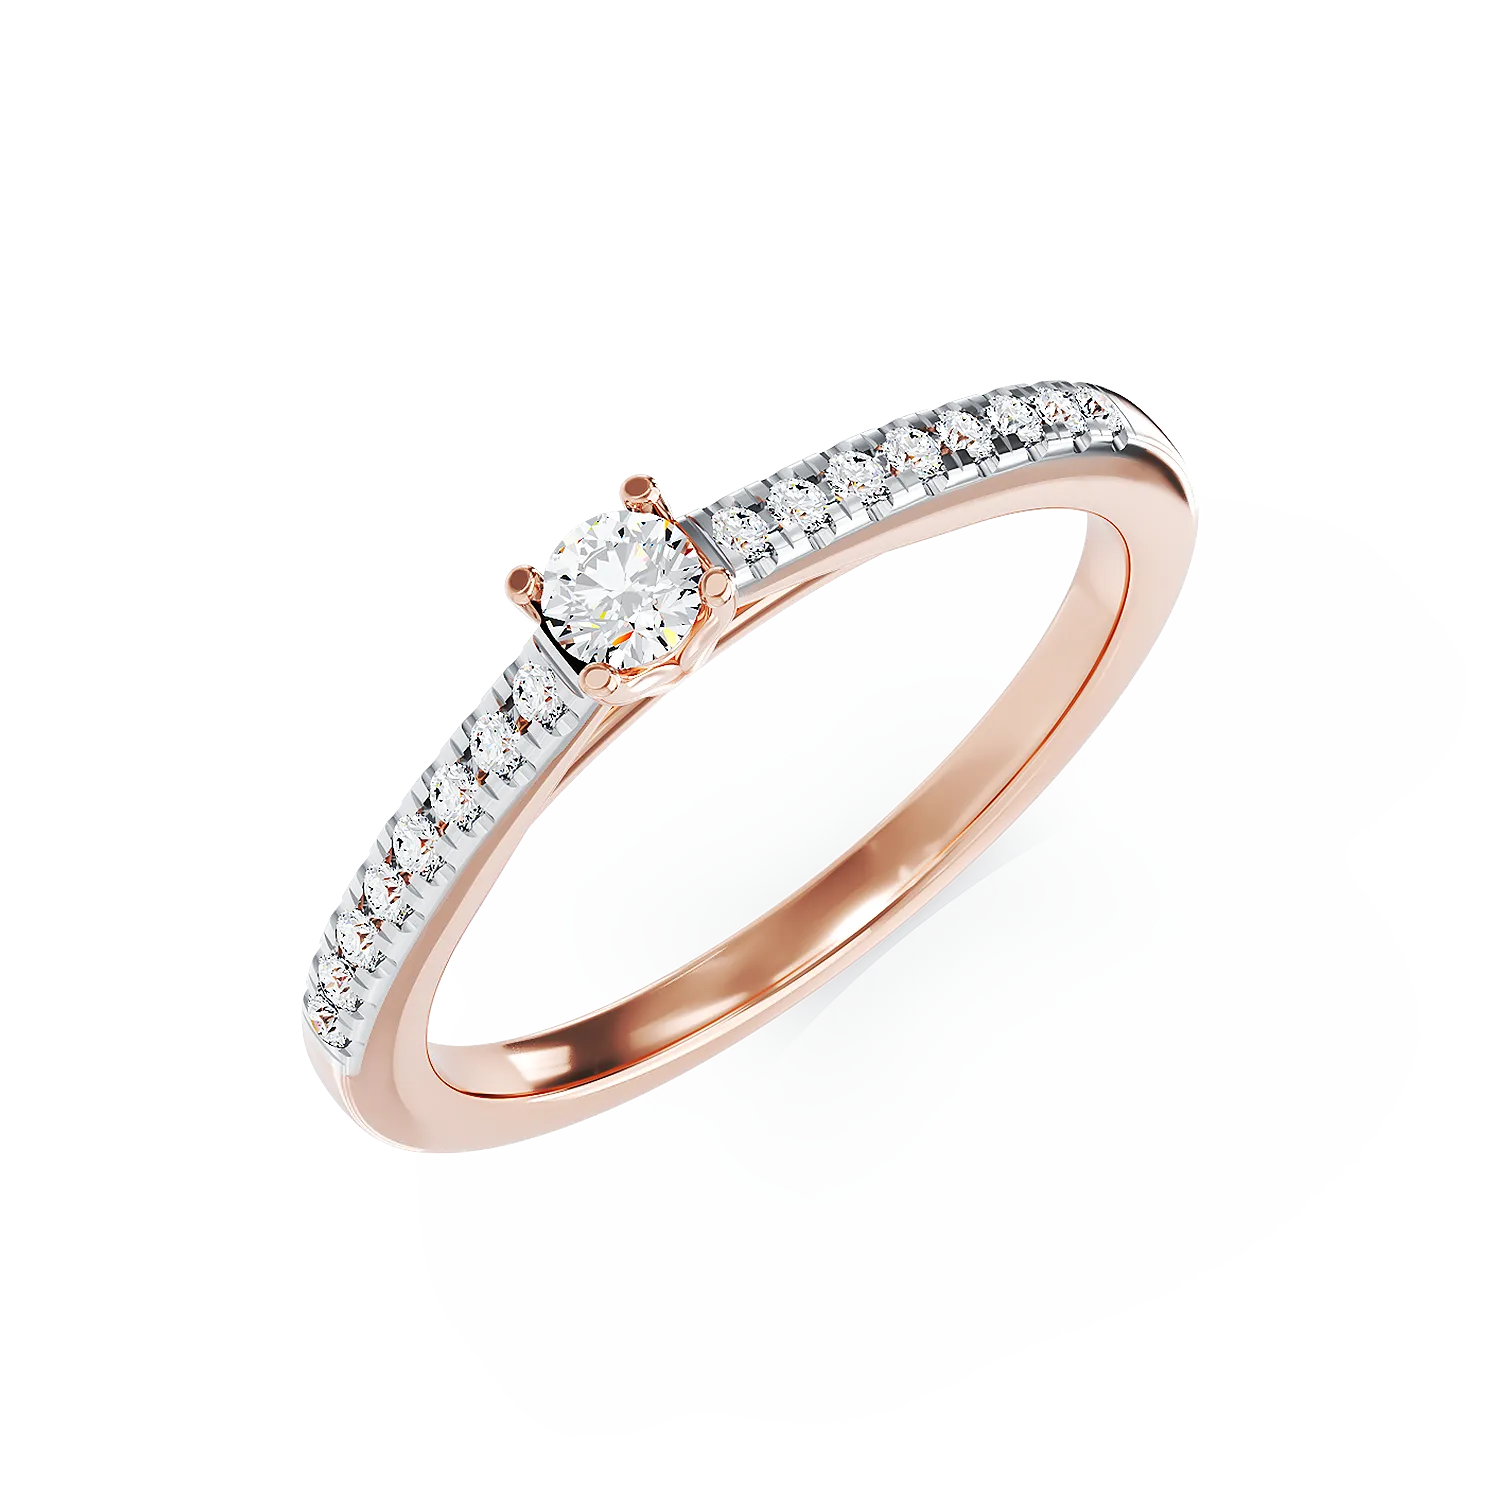 18K rose gold engagement ring with 0.2ct diamond and 0.185ct diamonds